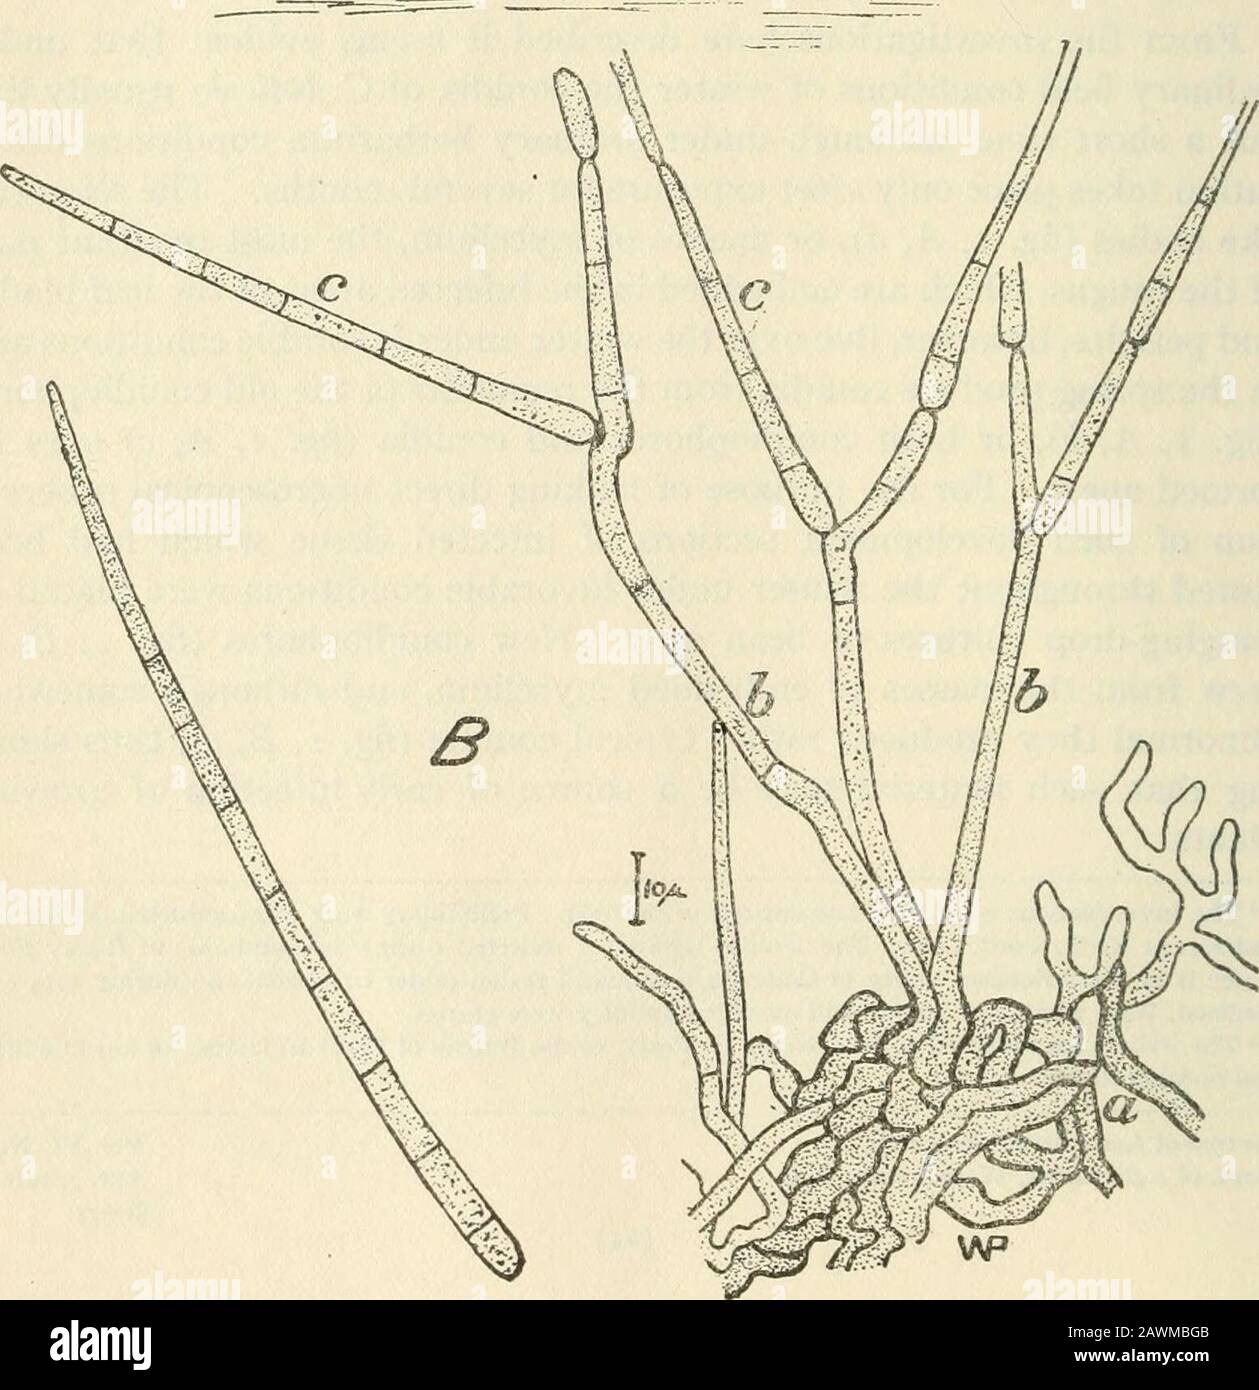 Journal of agricultural research .  ^ i/O/A.. Fig. I.—Cercospora beticola: A, Section of overwintered sugar-beet leaf showing embedded sclerotia-likebody, a, with a mass of old conidiophores, b, from which a new conidium, c, was produced. B. Produc-tion of rather typical conidiophores, b, and conidia, c, from a sclerotia-like mass, a, taken from over-wintered hst material and placed in hanging-drop cultures. Apr. 3, 1916 Climatic Conditions and Cercospora beticola 23 CONIDIA Thiimen (1886, p. 50-54) ^ believed that the spores of Cercospora beti-cola are able to live for a certain length of ti Stock Photo